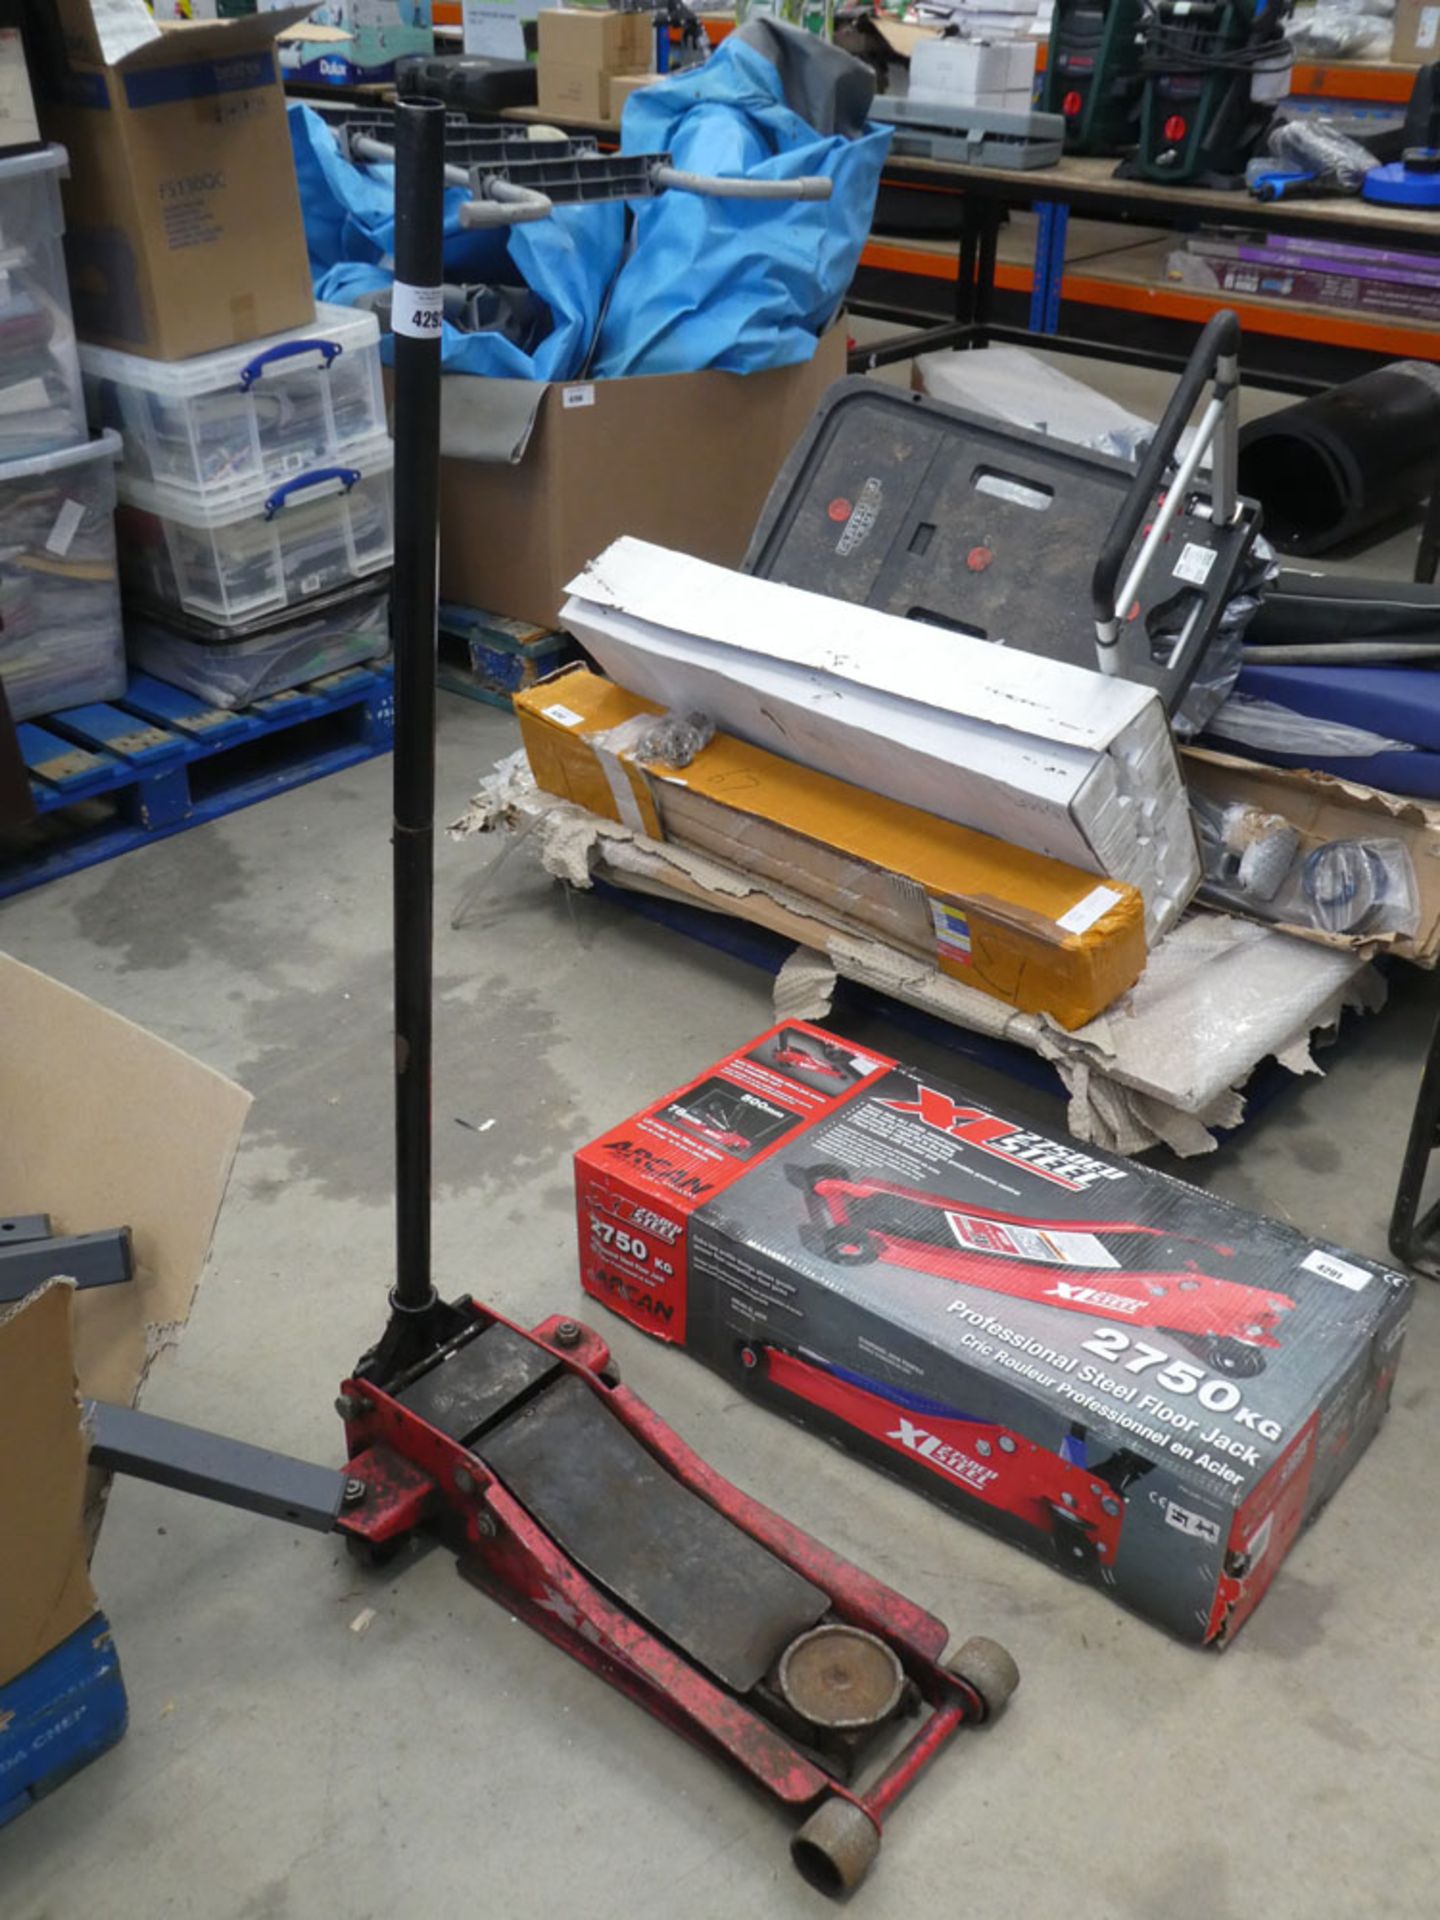 Unboxed Arcan trolley jack